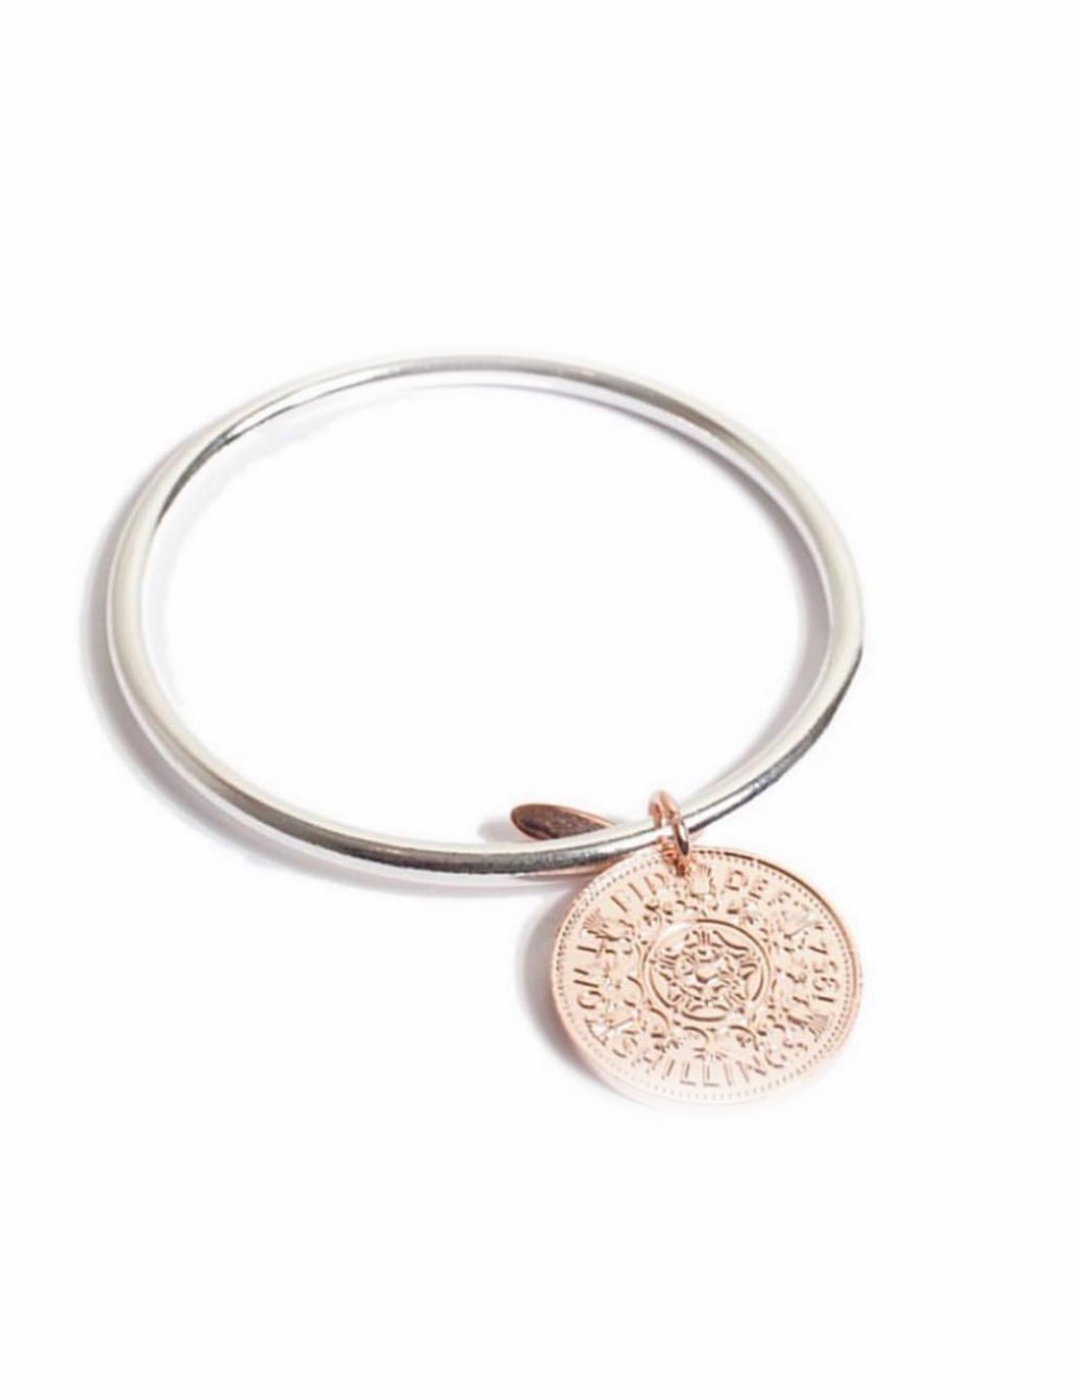 Classic Rose Gold Coin Bangle